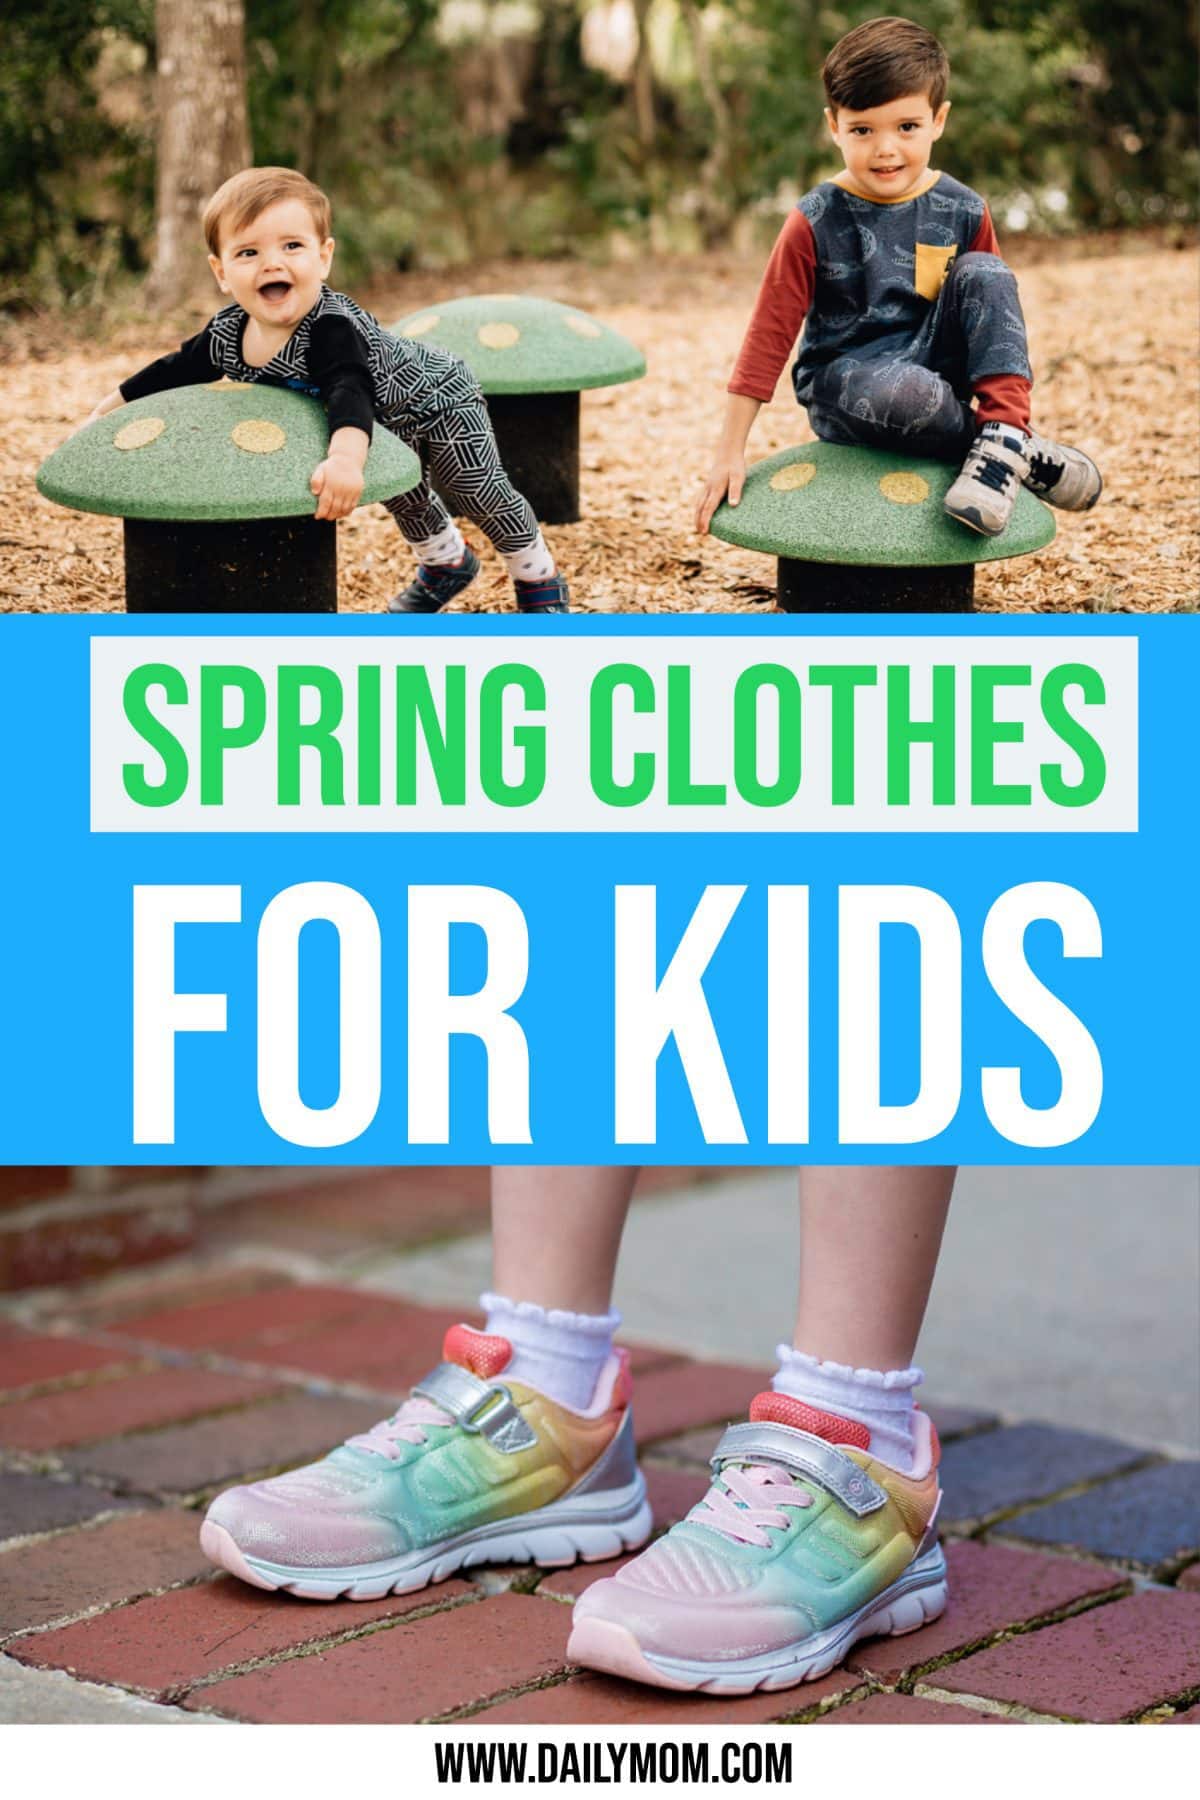 Spring Clothes For Kids